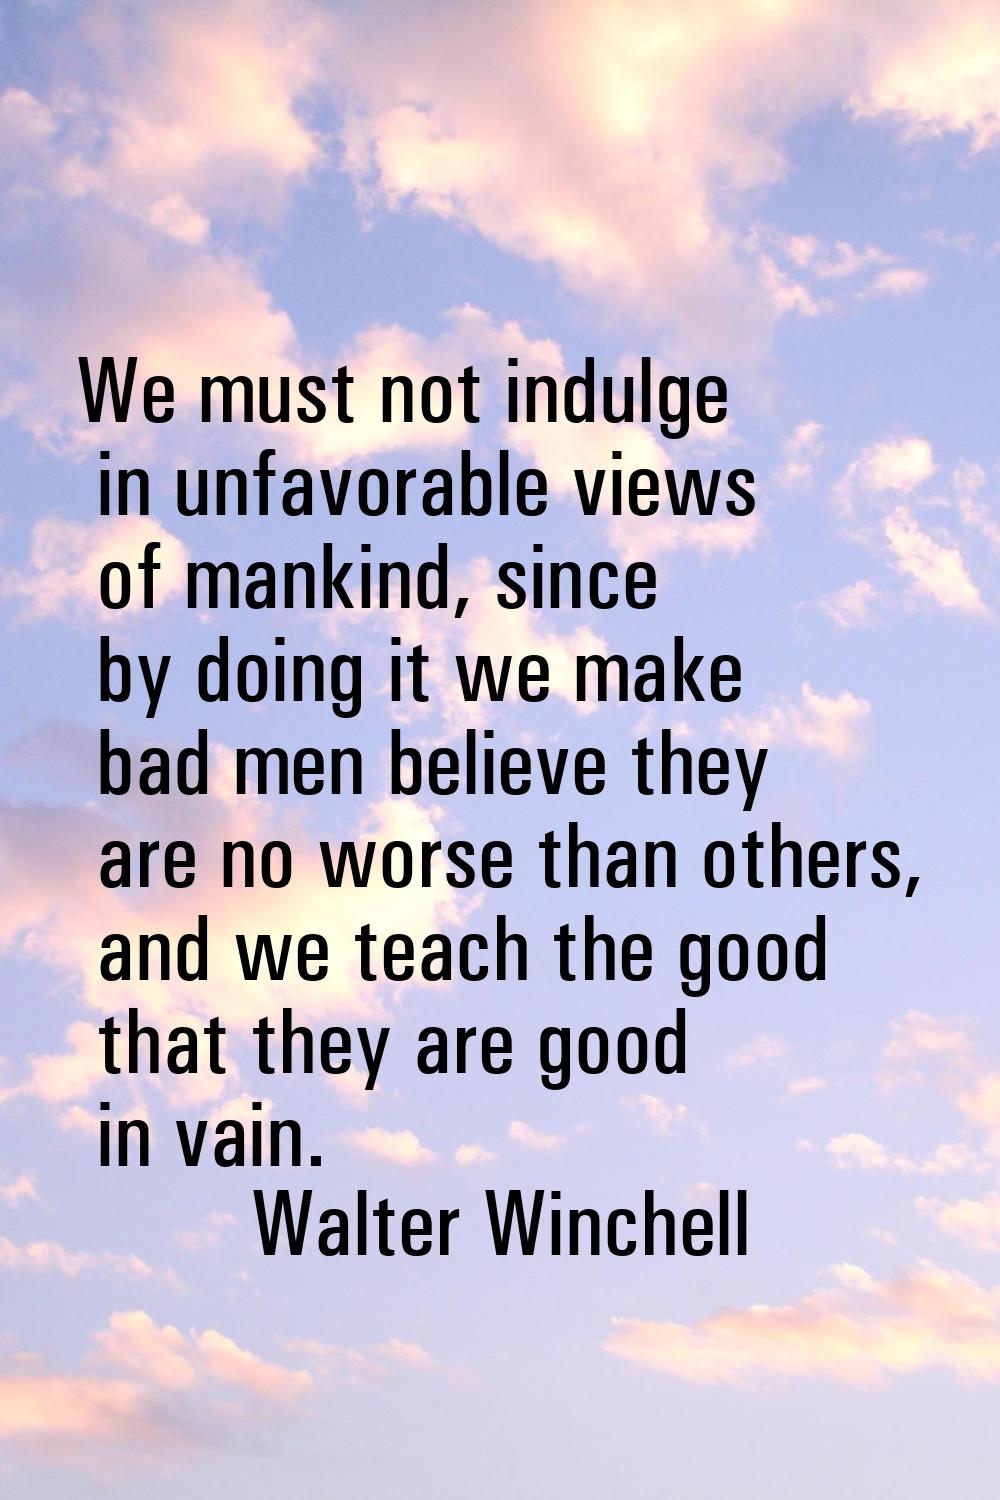 We must not indulge in unfavorable views of mankind, since by doing it we make bad men believe they